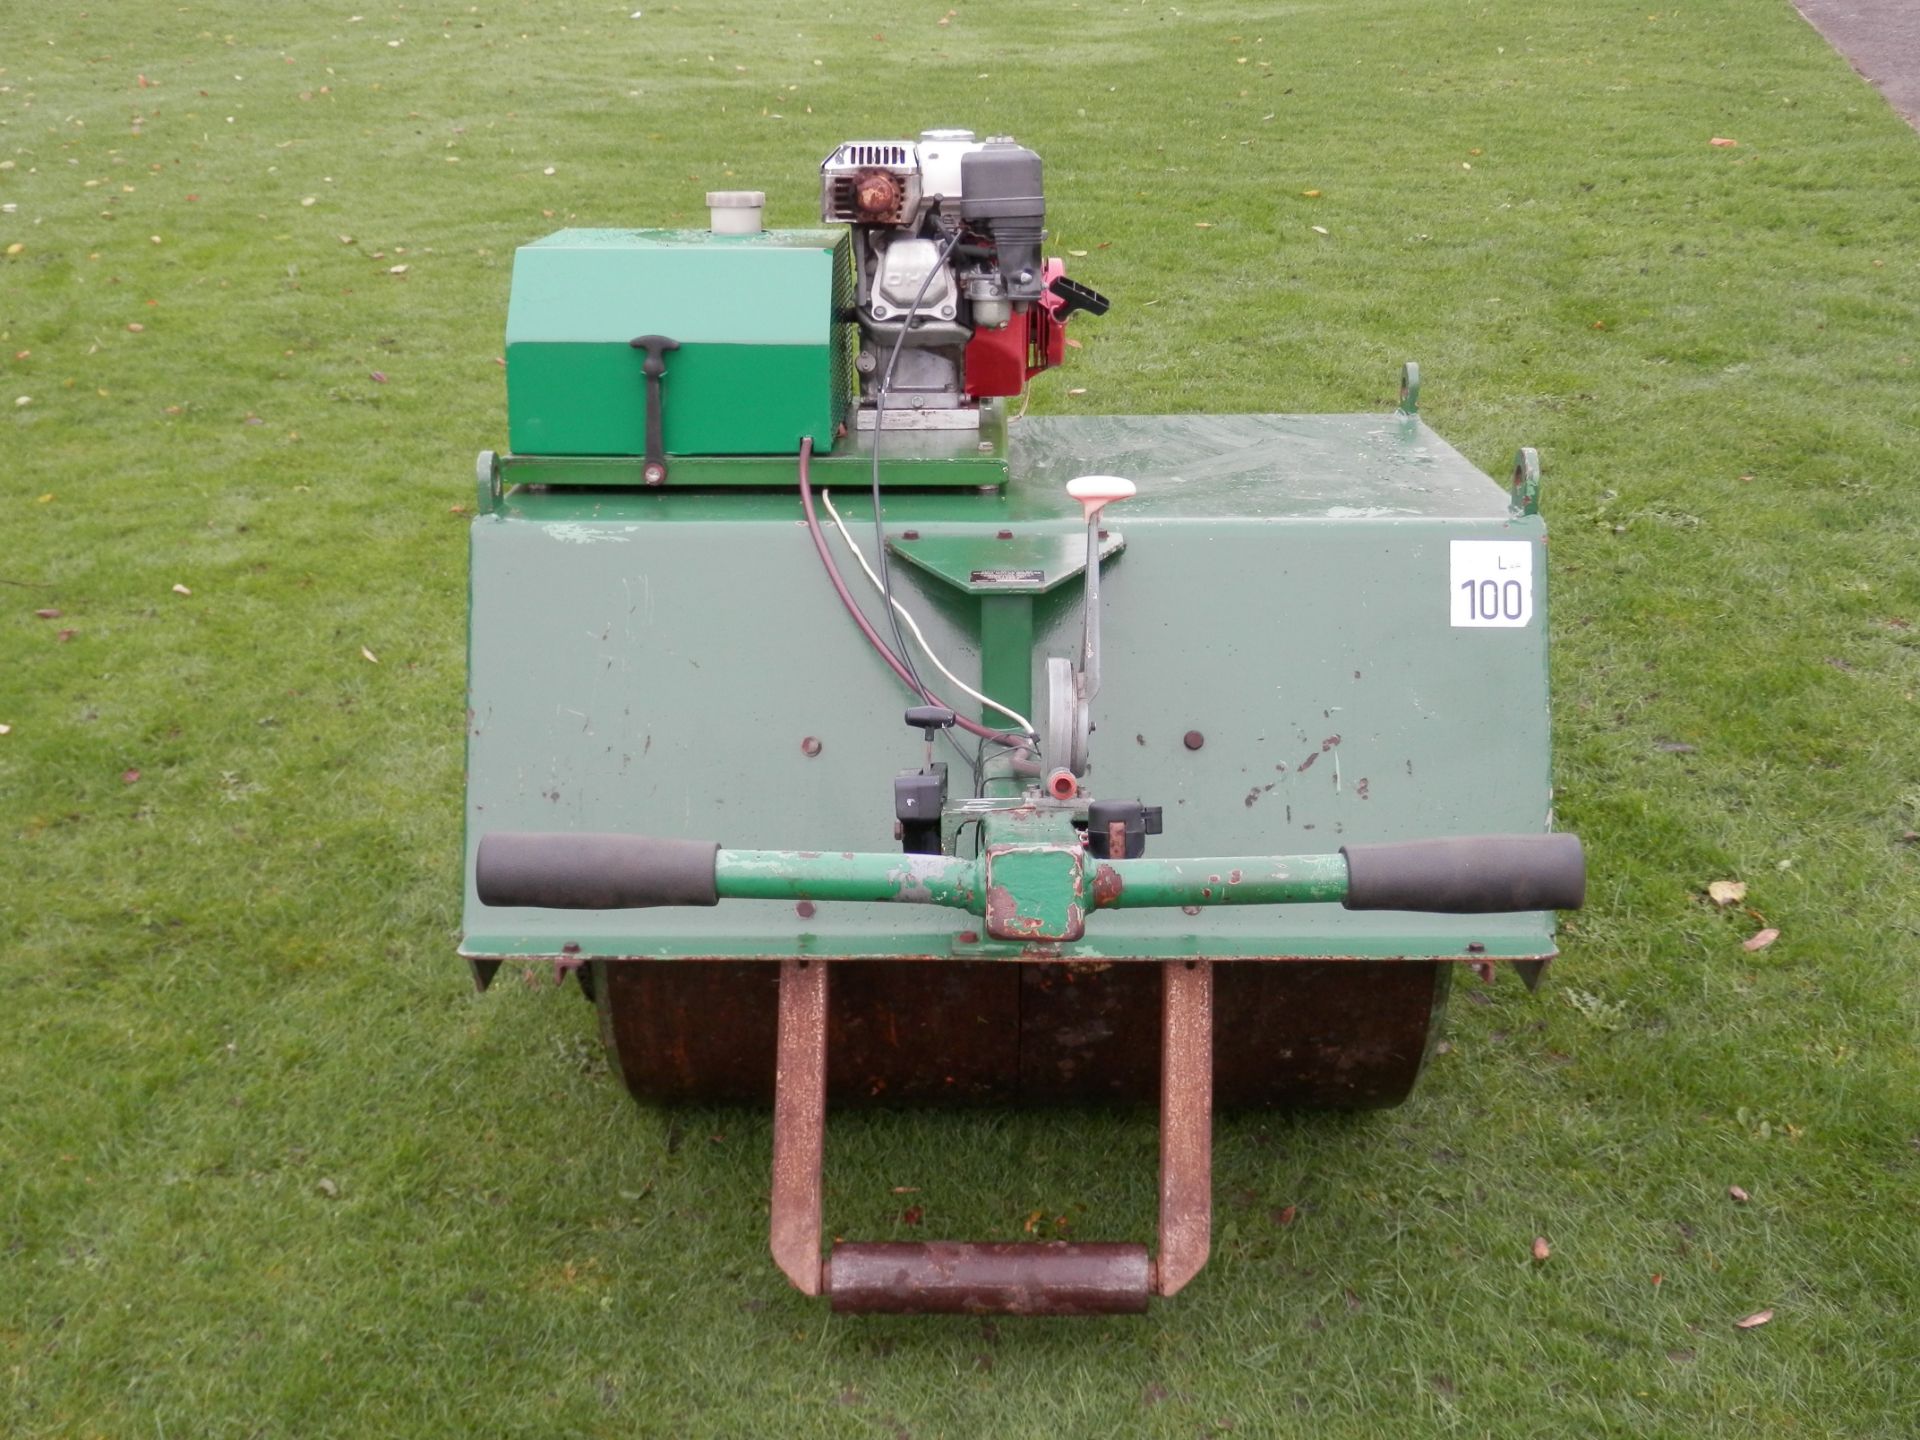 LARGE 1990S DENNIS LAWN ROLLER WITH HONDA 5 HP PETROL ENGINE. - Image 4 of 9